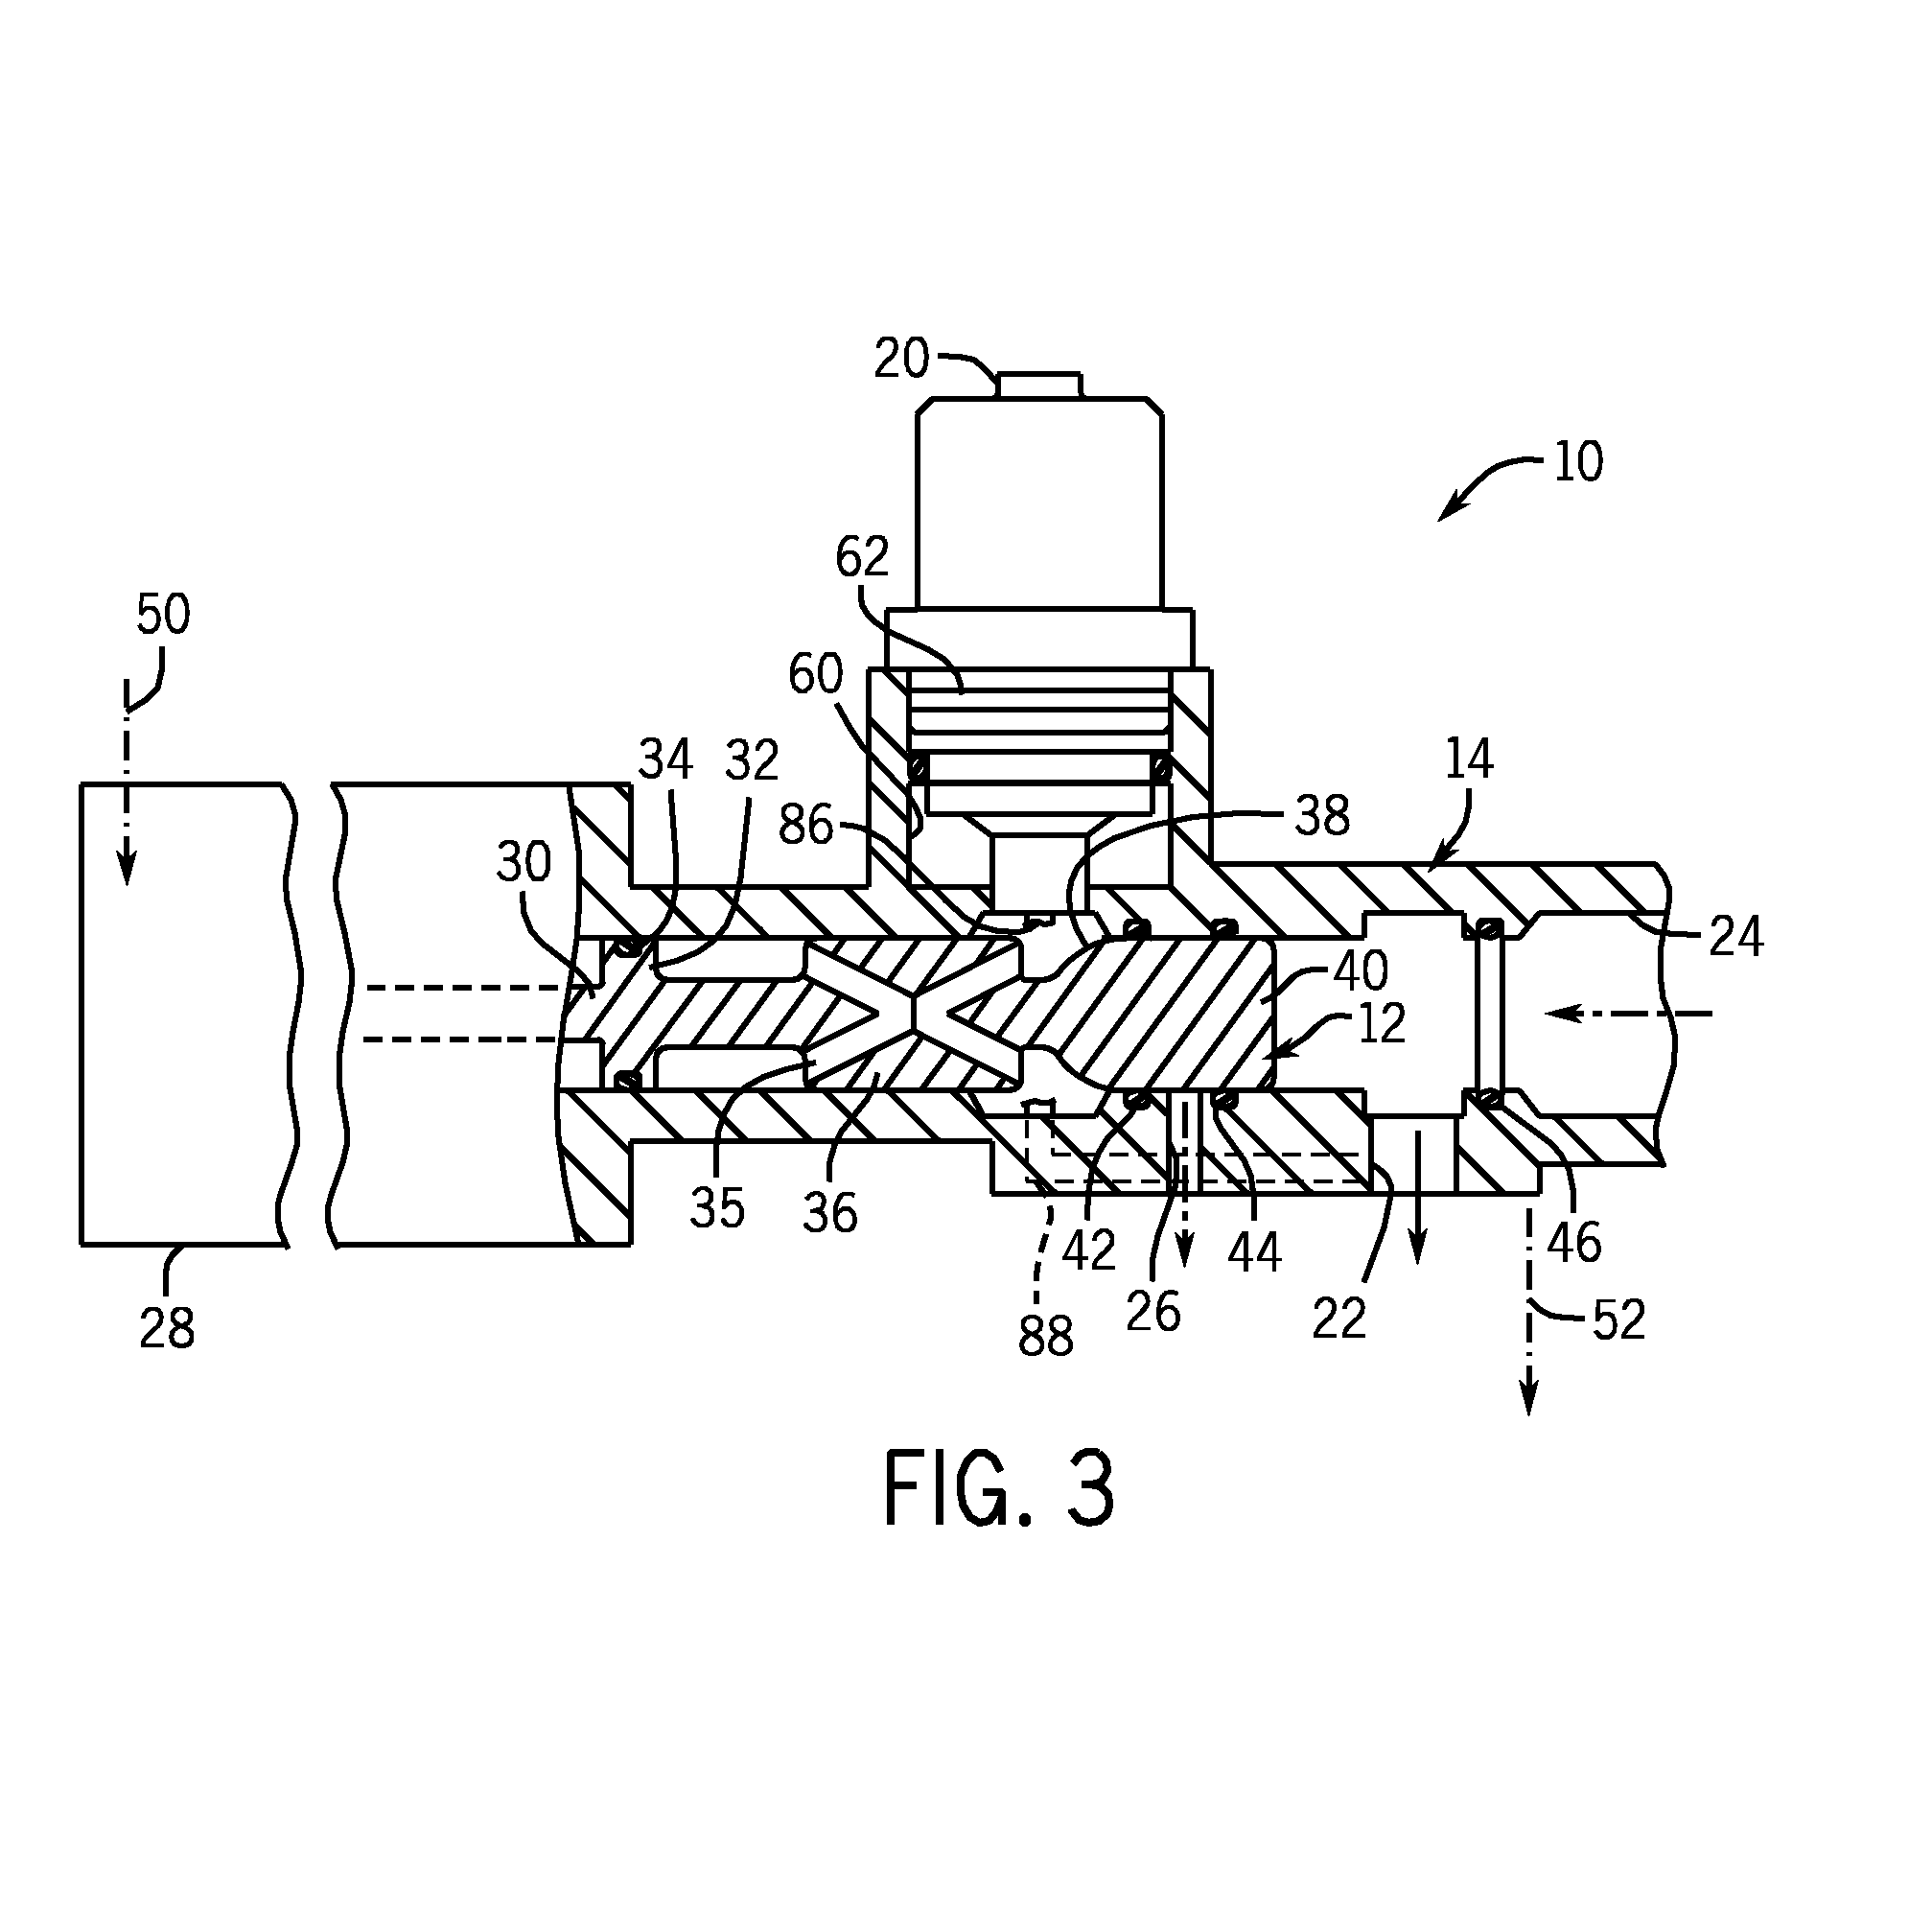 Fuel control system with metering purge valve for dual fuel turbine